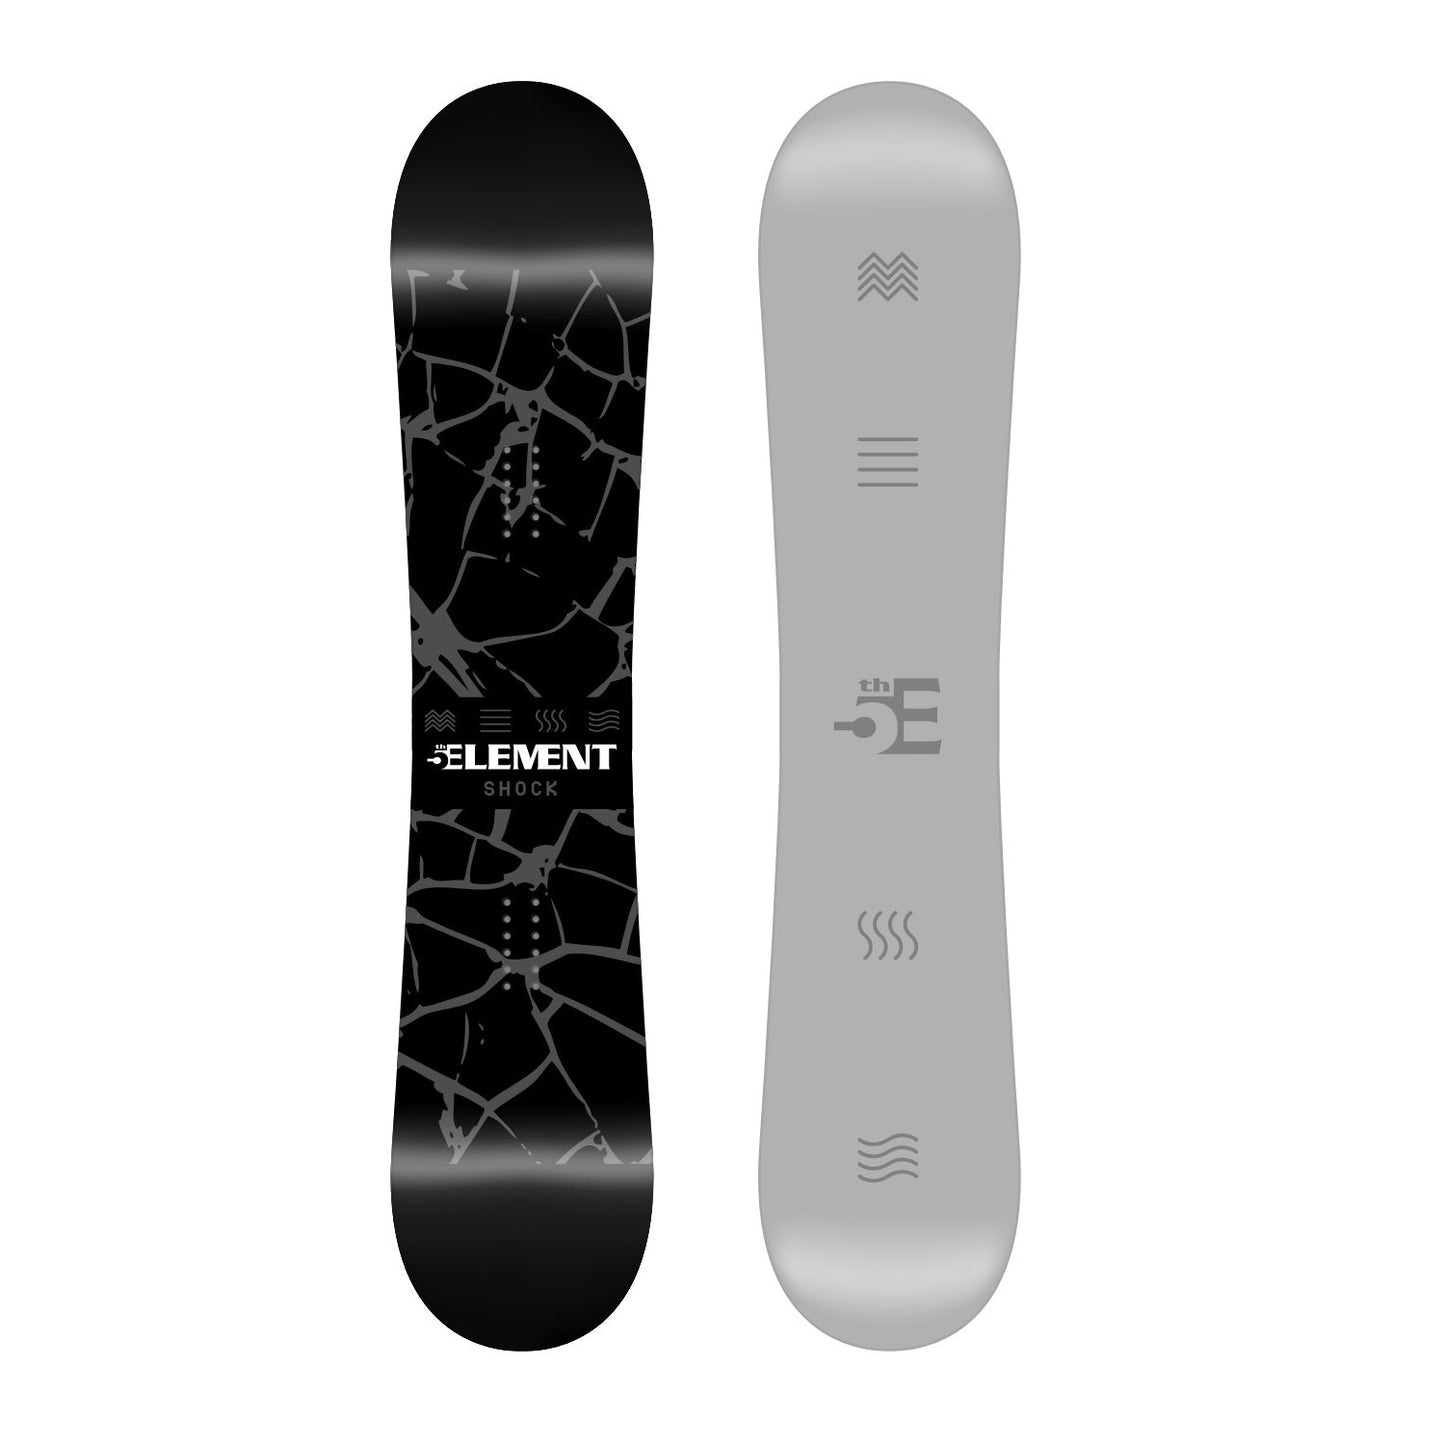 5th Element Shock ST-2 ATOP Complete Snowboard Package - Black/Red Grey